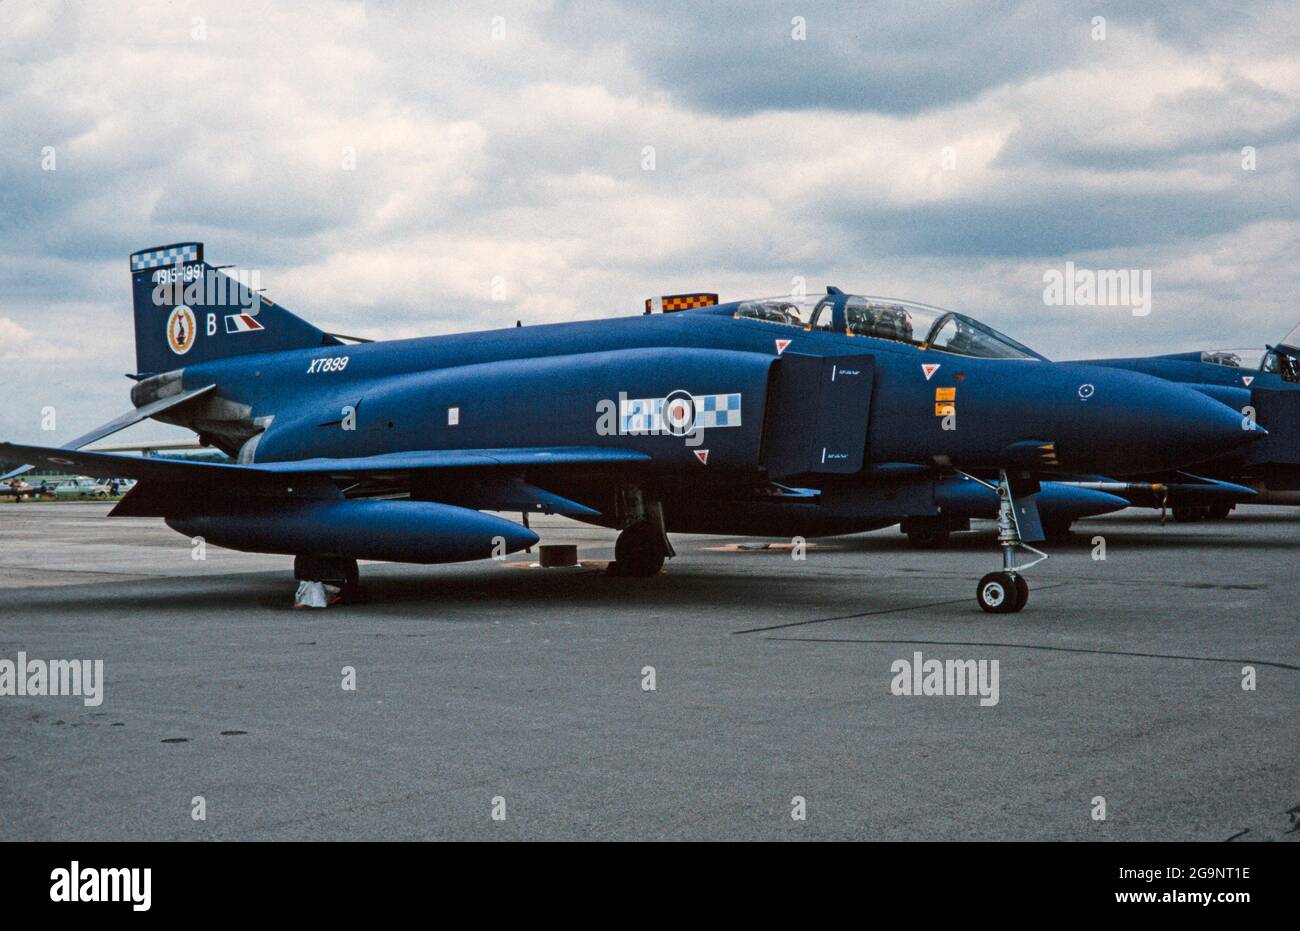 McDonnell Douglas F-4 Phantom FGR 2, serial number XT899, of the British Royal Air Force. Photo taken at the Fairford Airshow in July 1991. Stock Photo